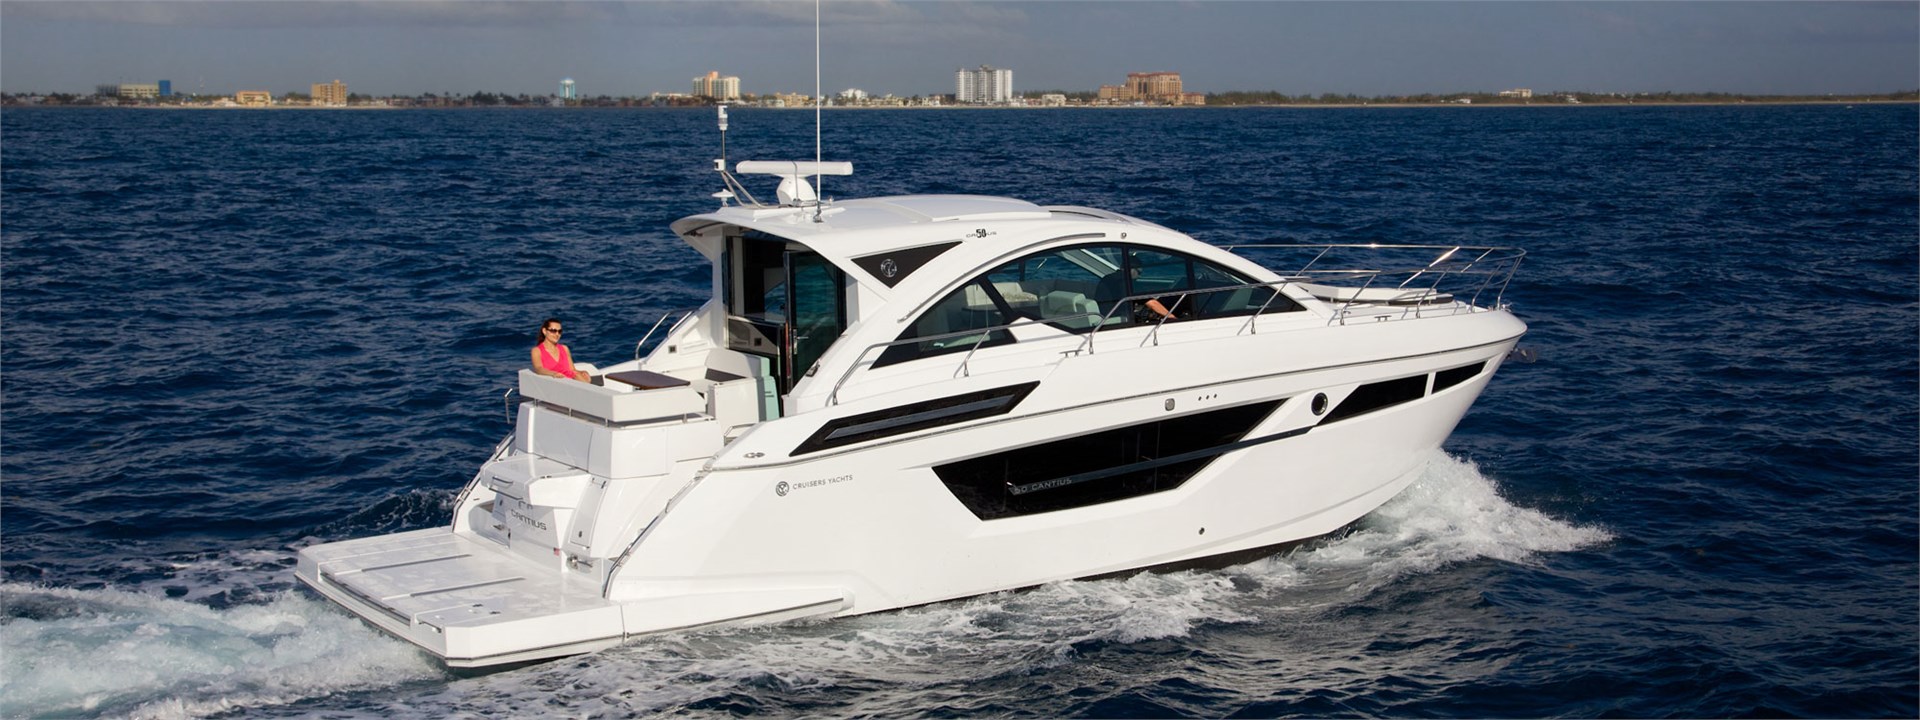 Water Shot for a Cruiser Yachts 50 Cantius